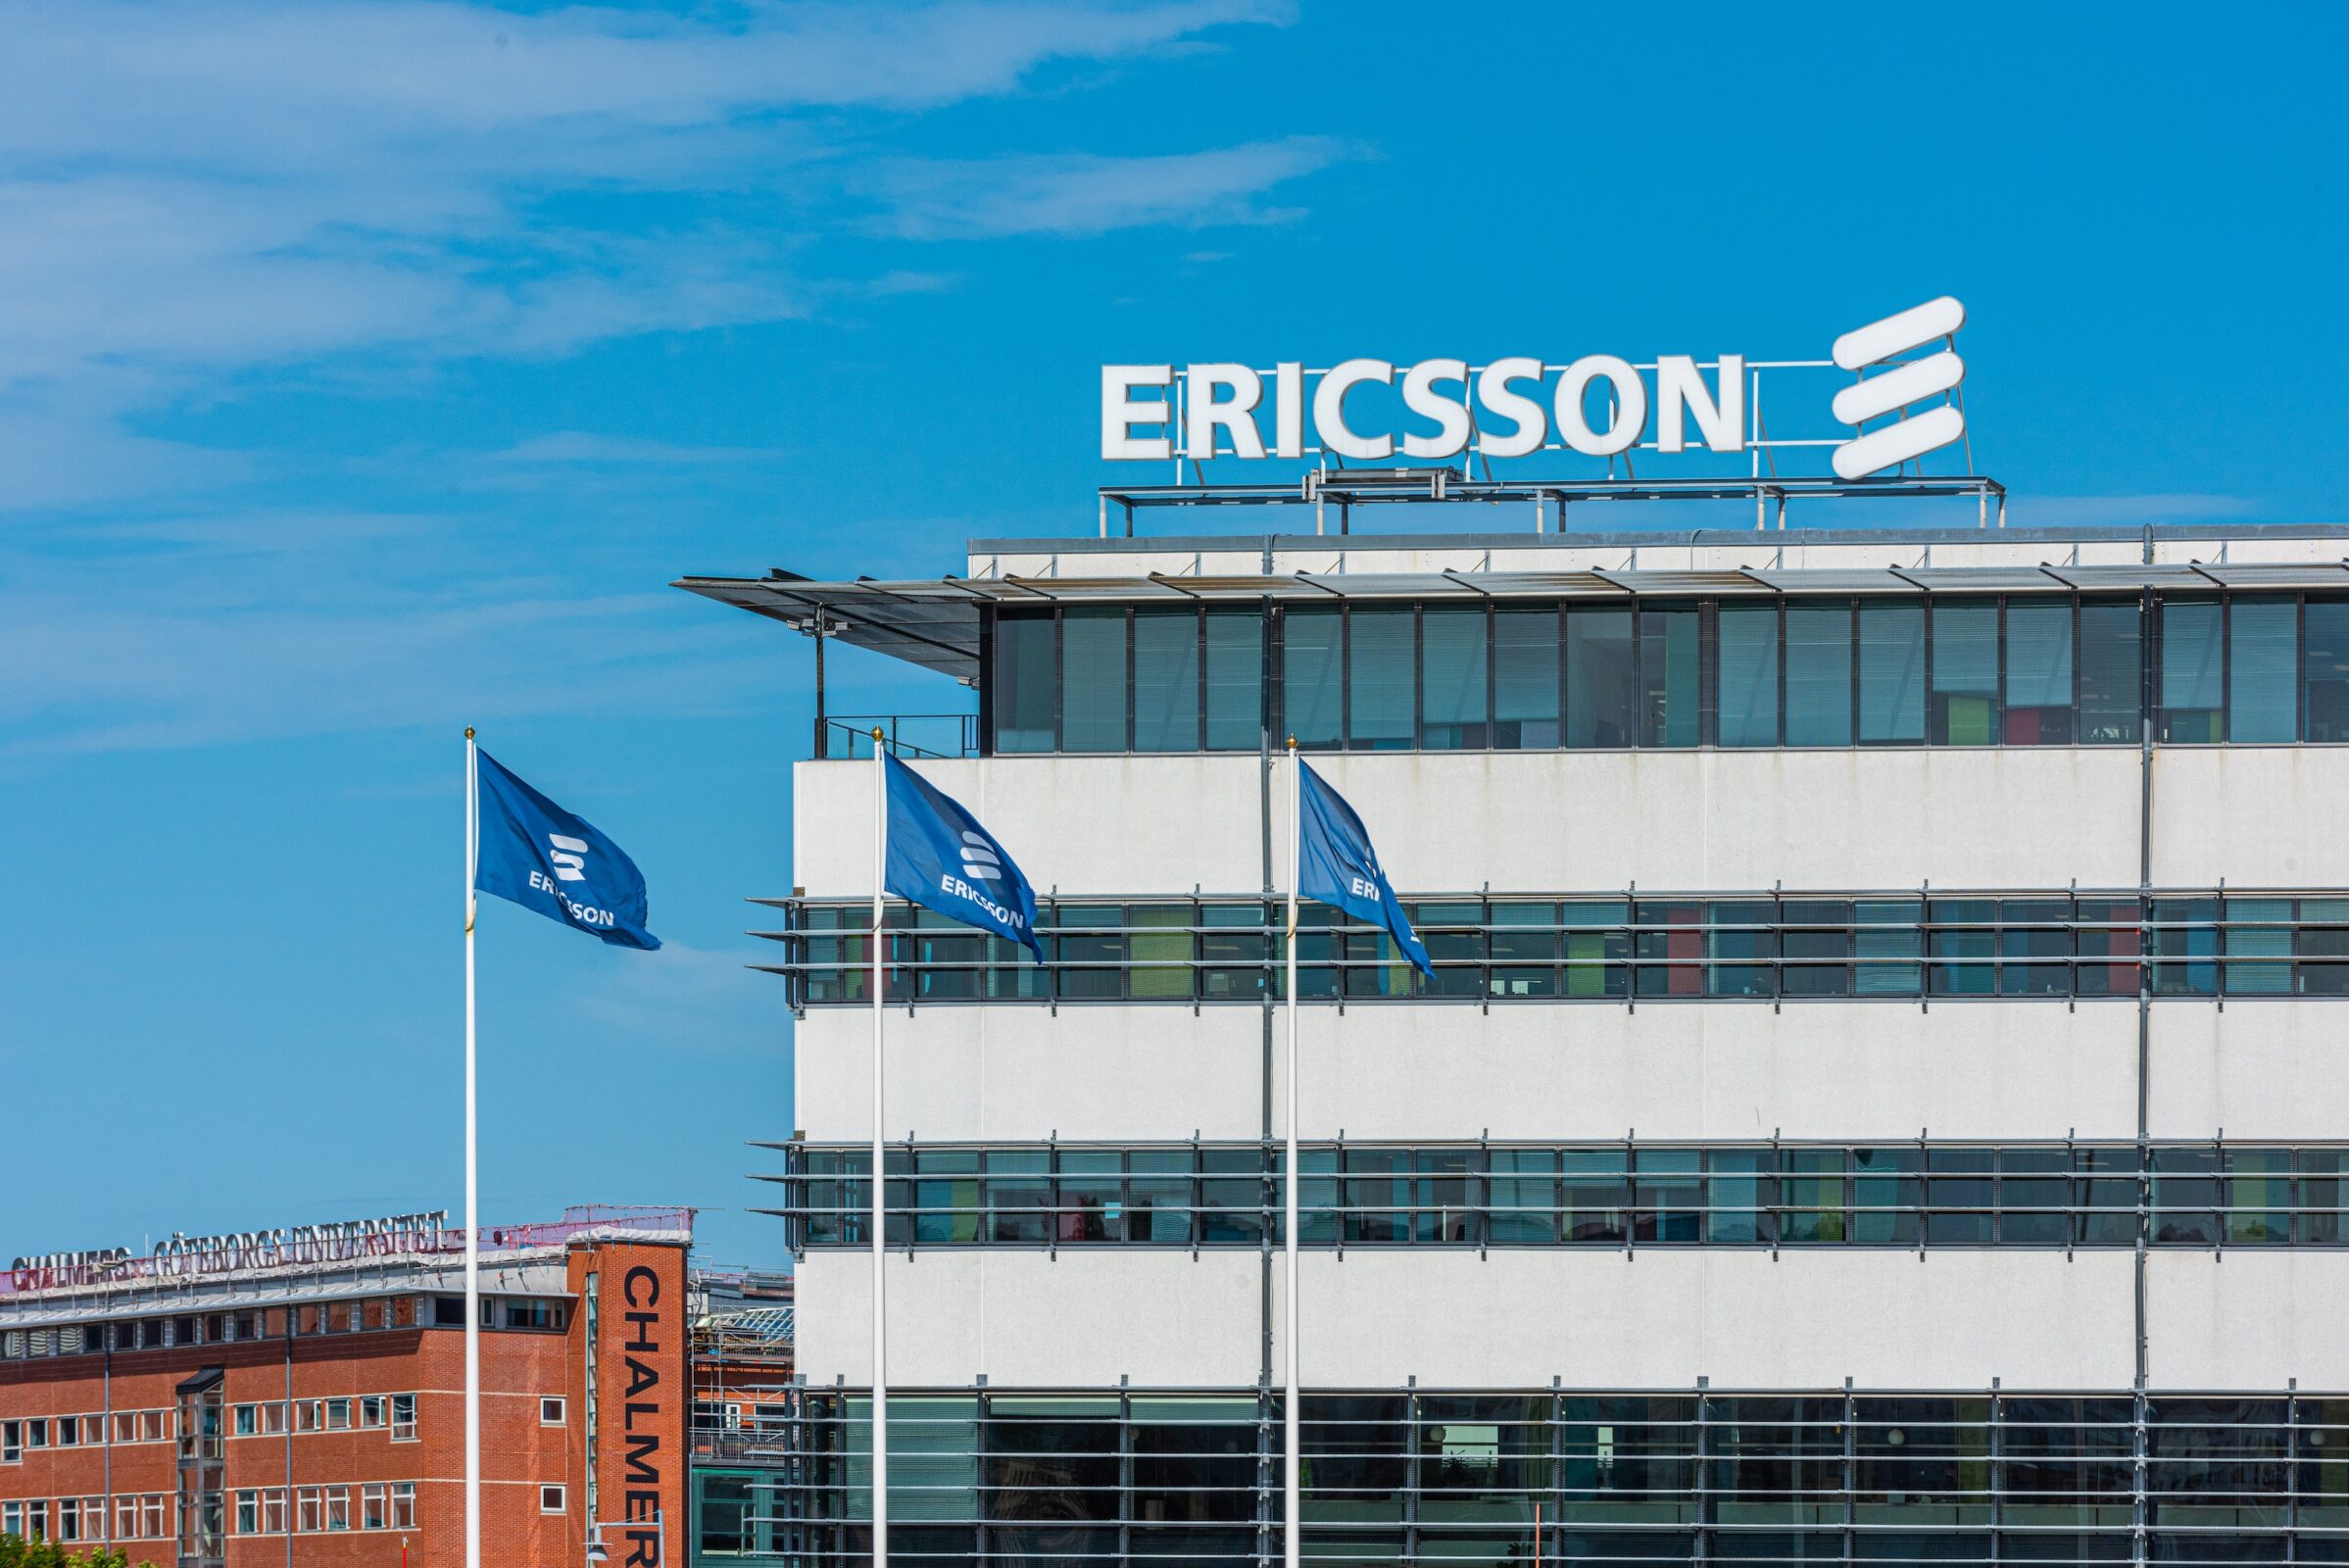 2030?  It will probably be put in with AI.  Ericsson analysis outcomes